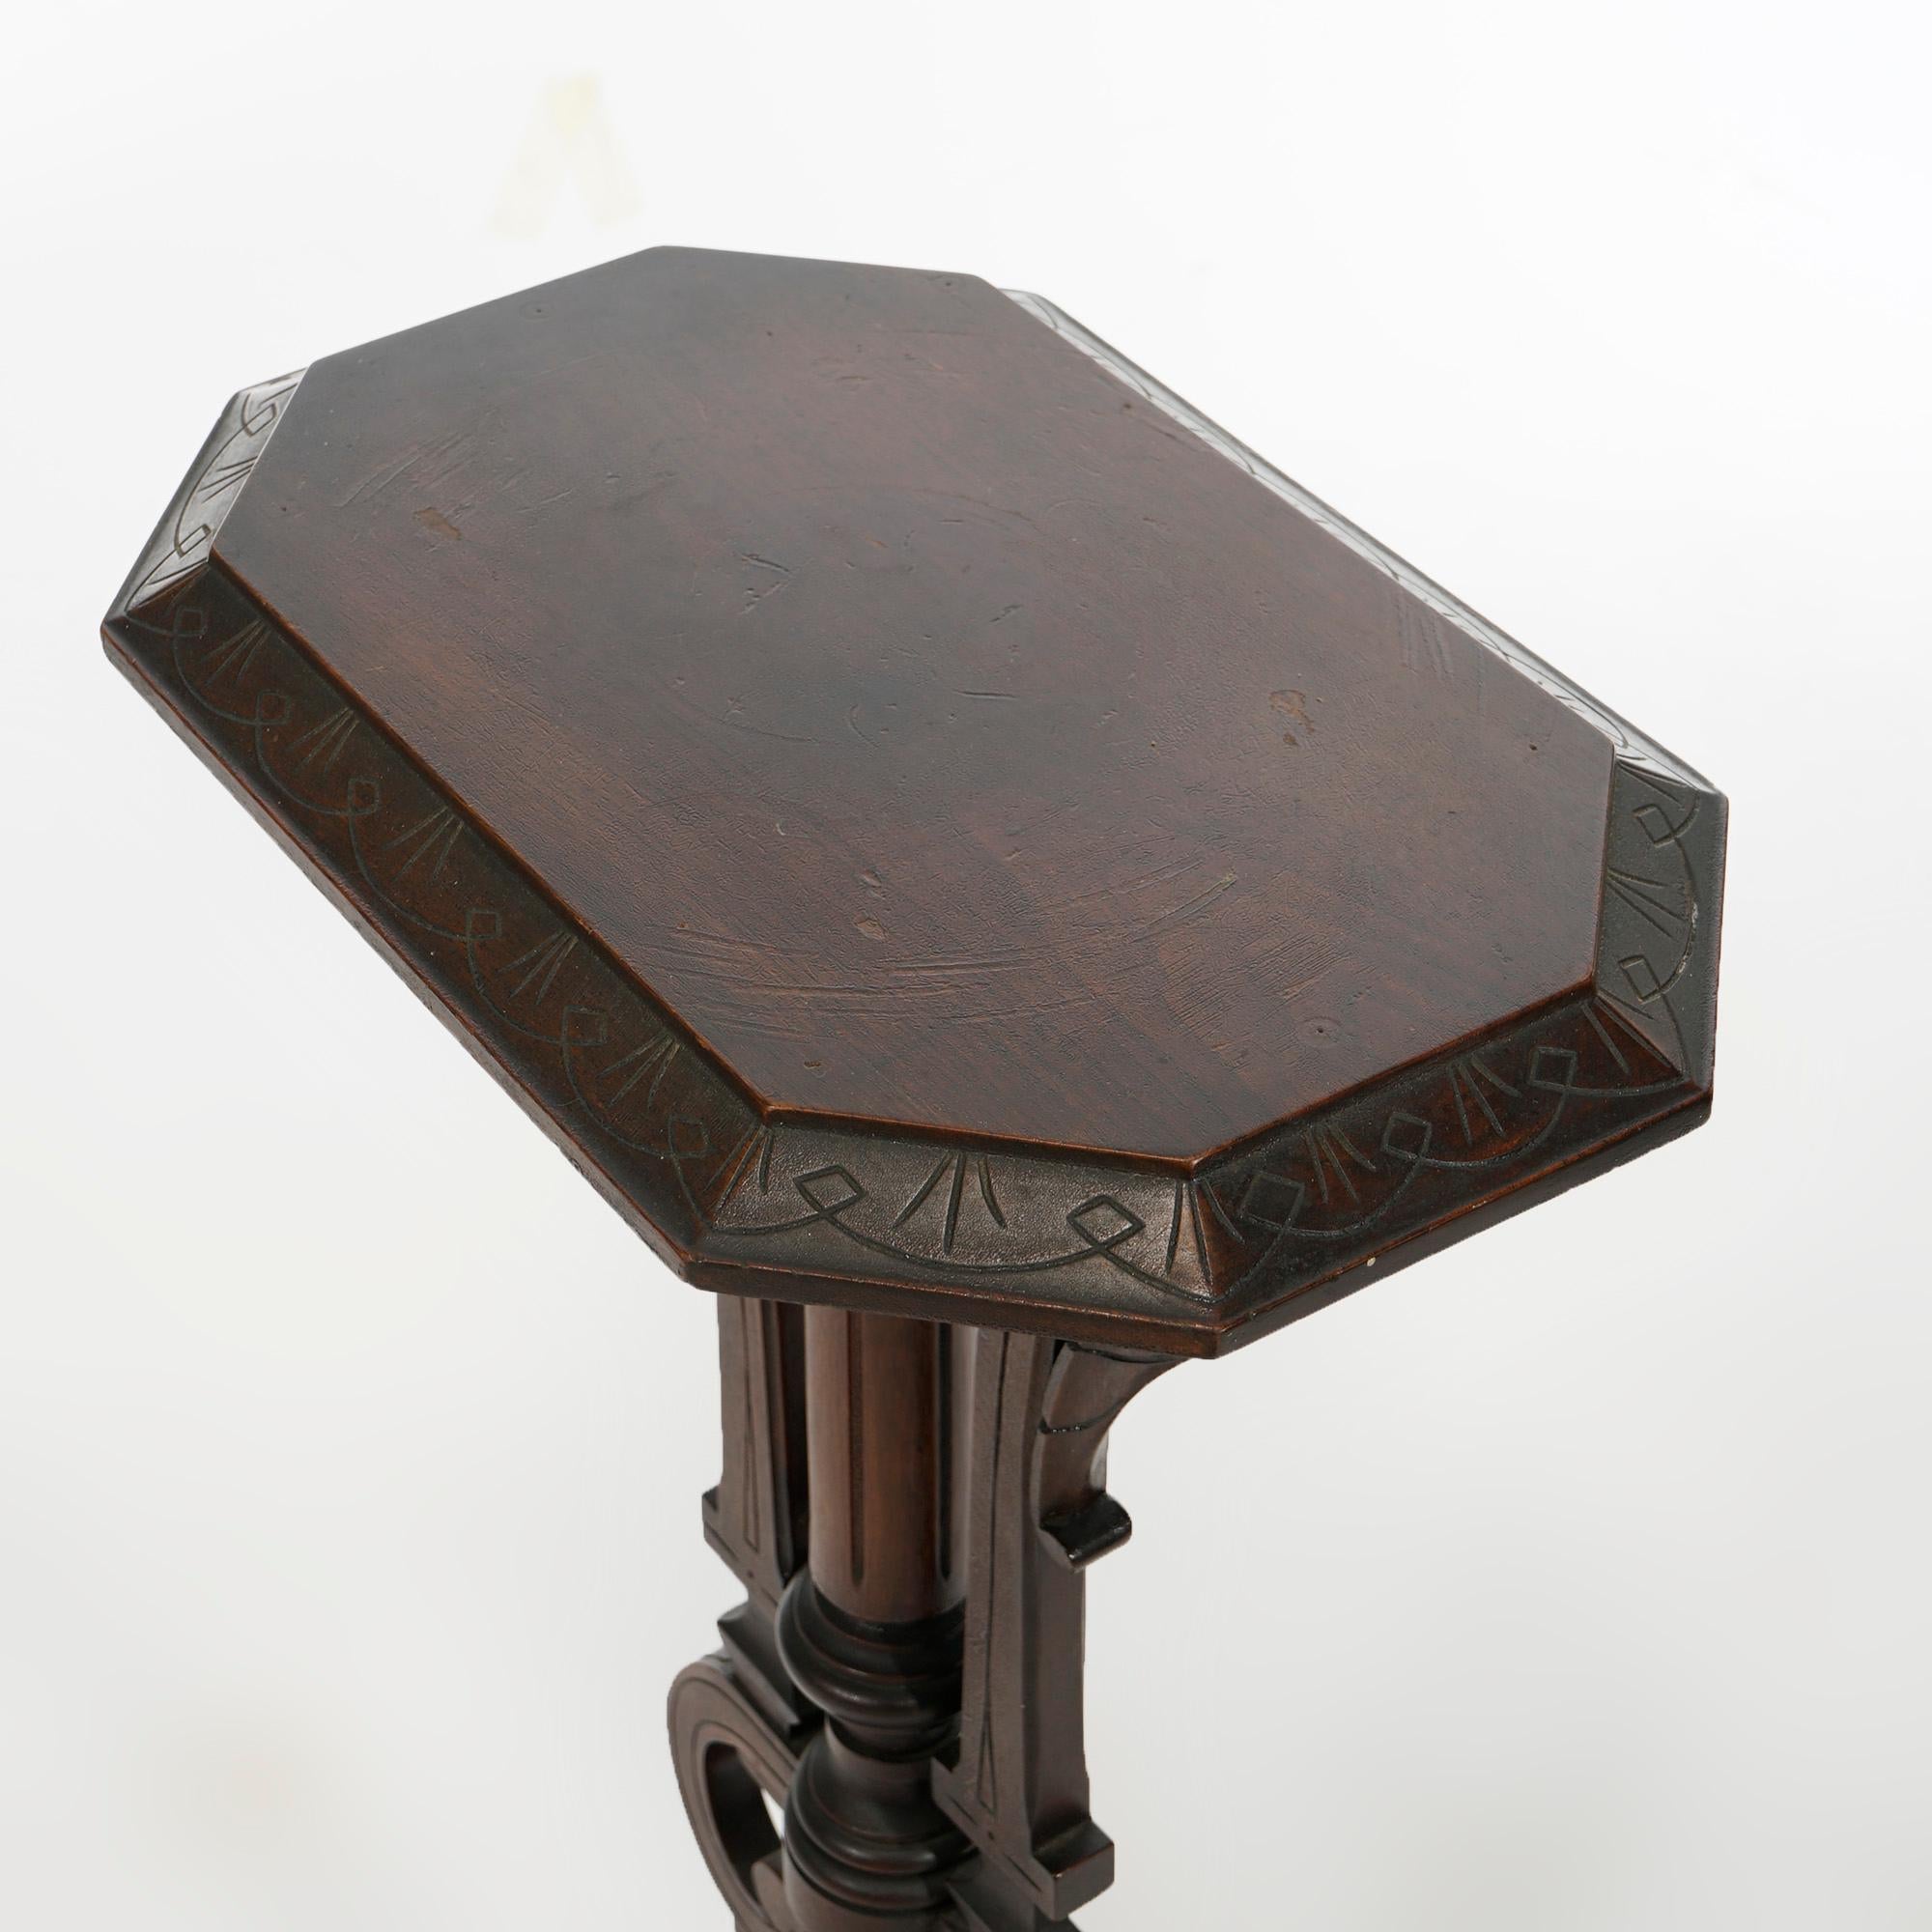 Antique Aesthetic Movement Carved Walnut Sculpture Display Pedestal Circa 1890 For Sale 6